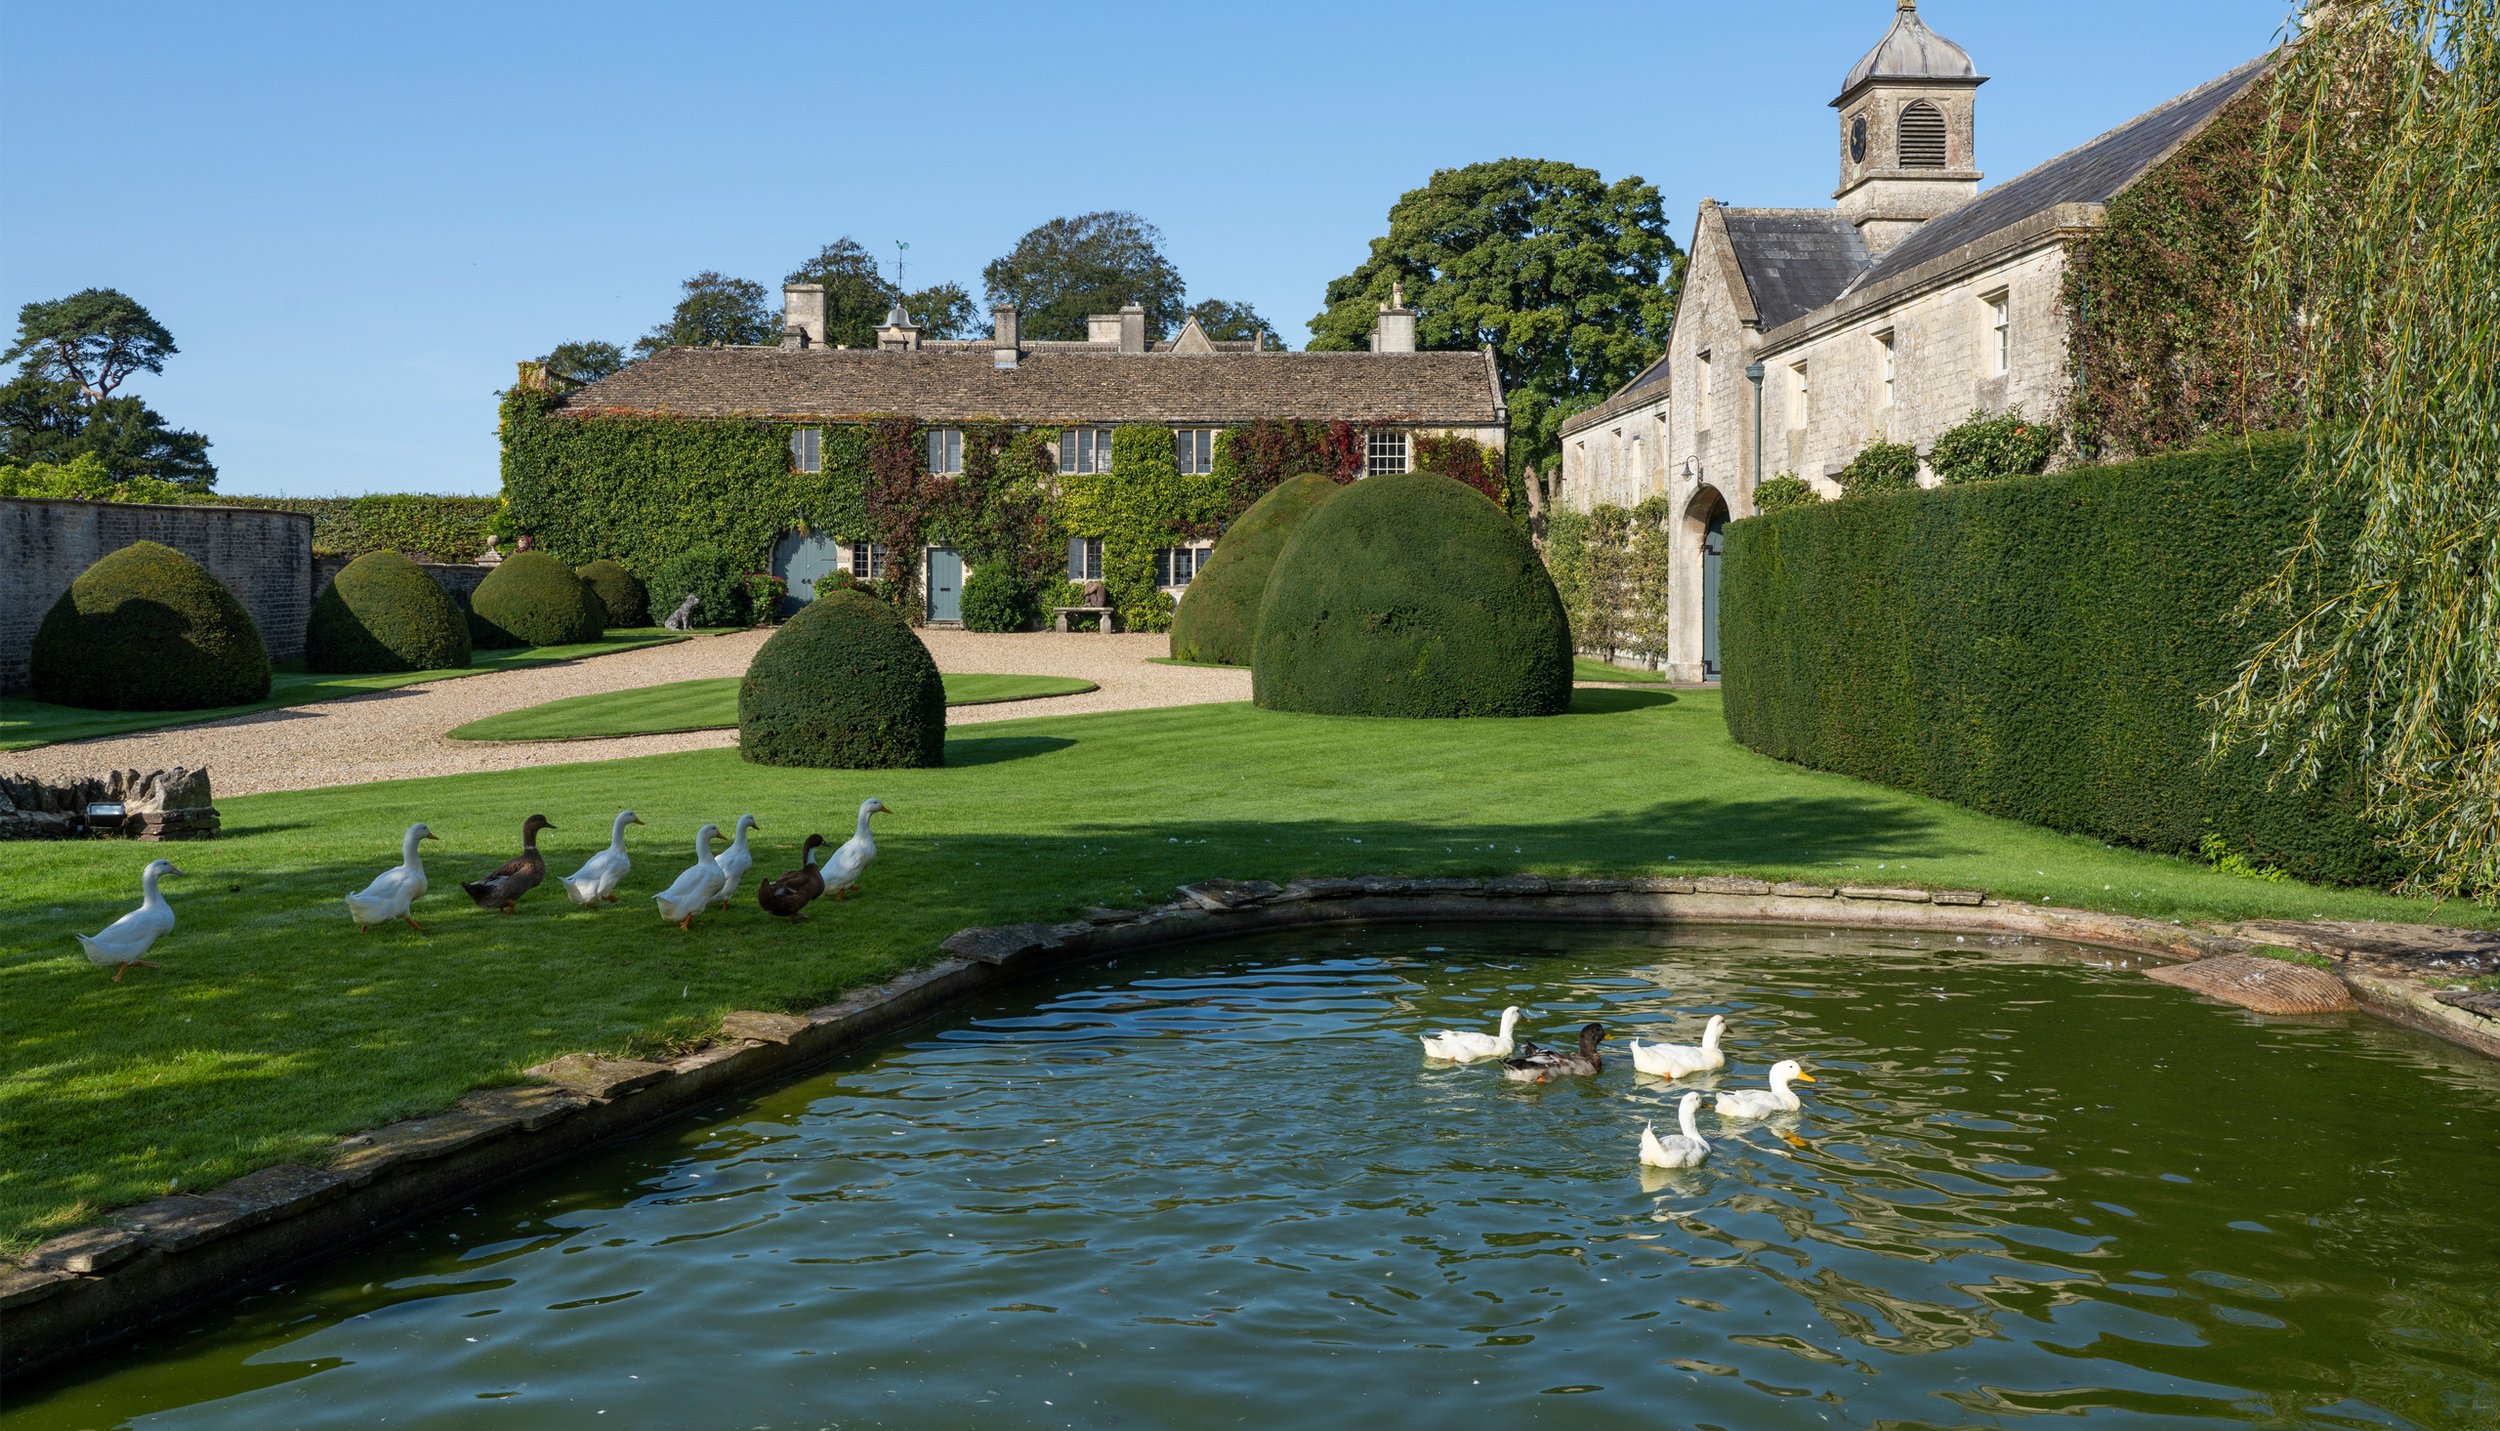 Francis+York+Country House in the Cotswolds with Famous Formal Gardens 00030.jpg